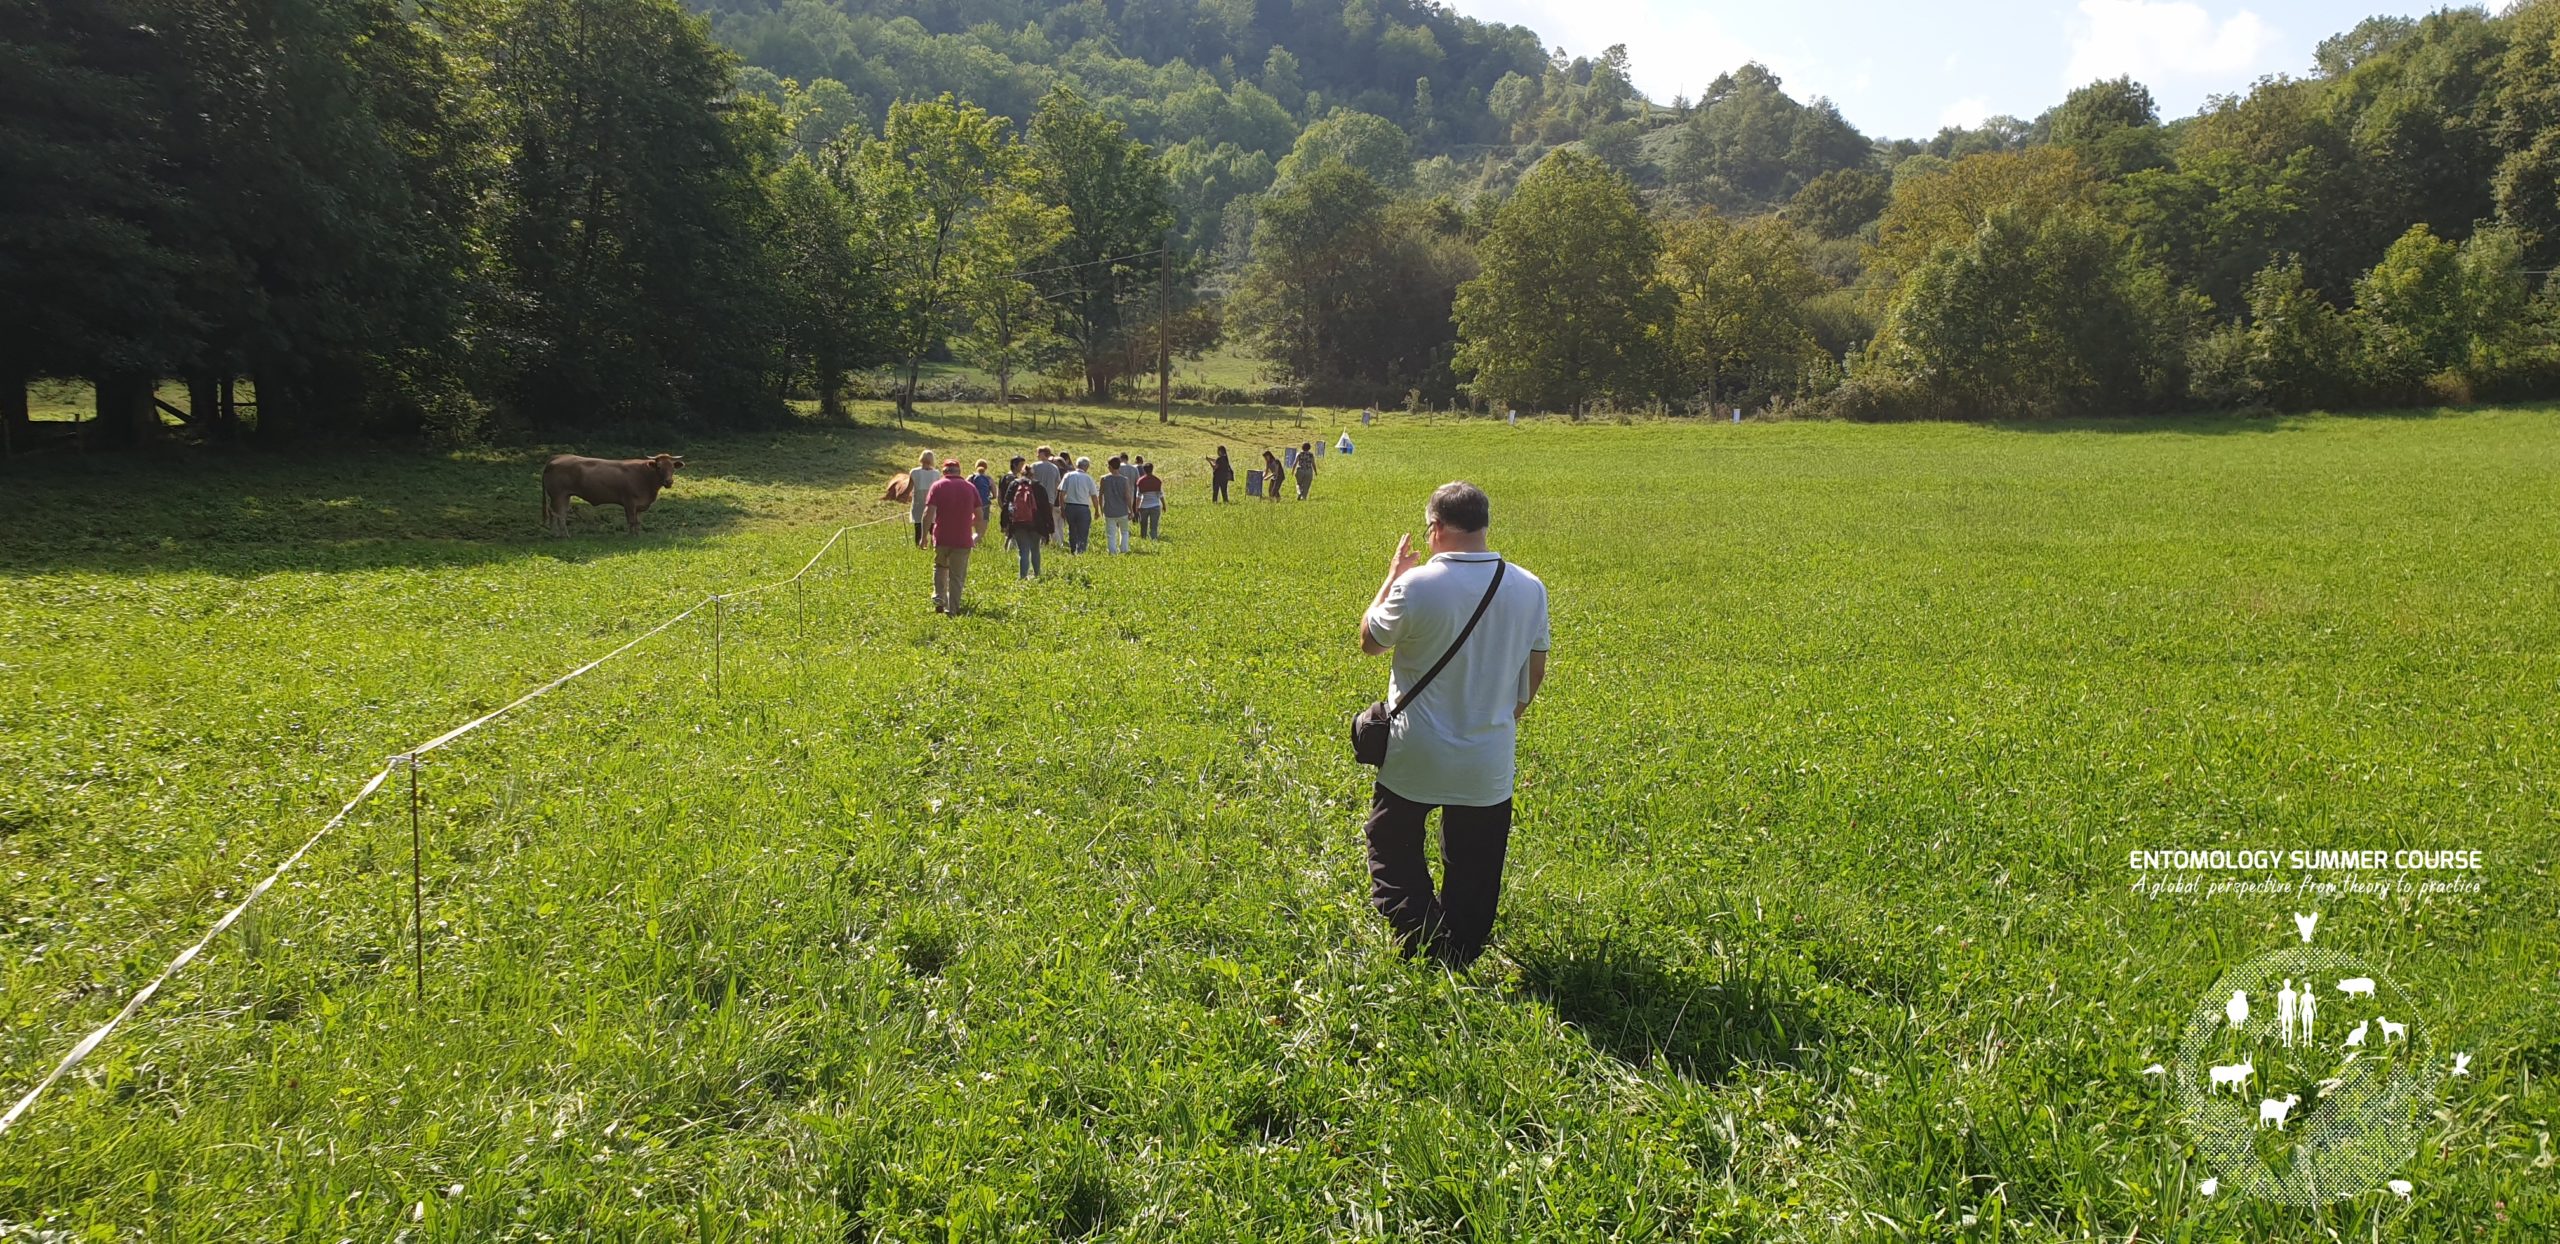 Laboratory and field work - Entomology Summer Course